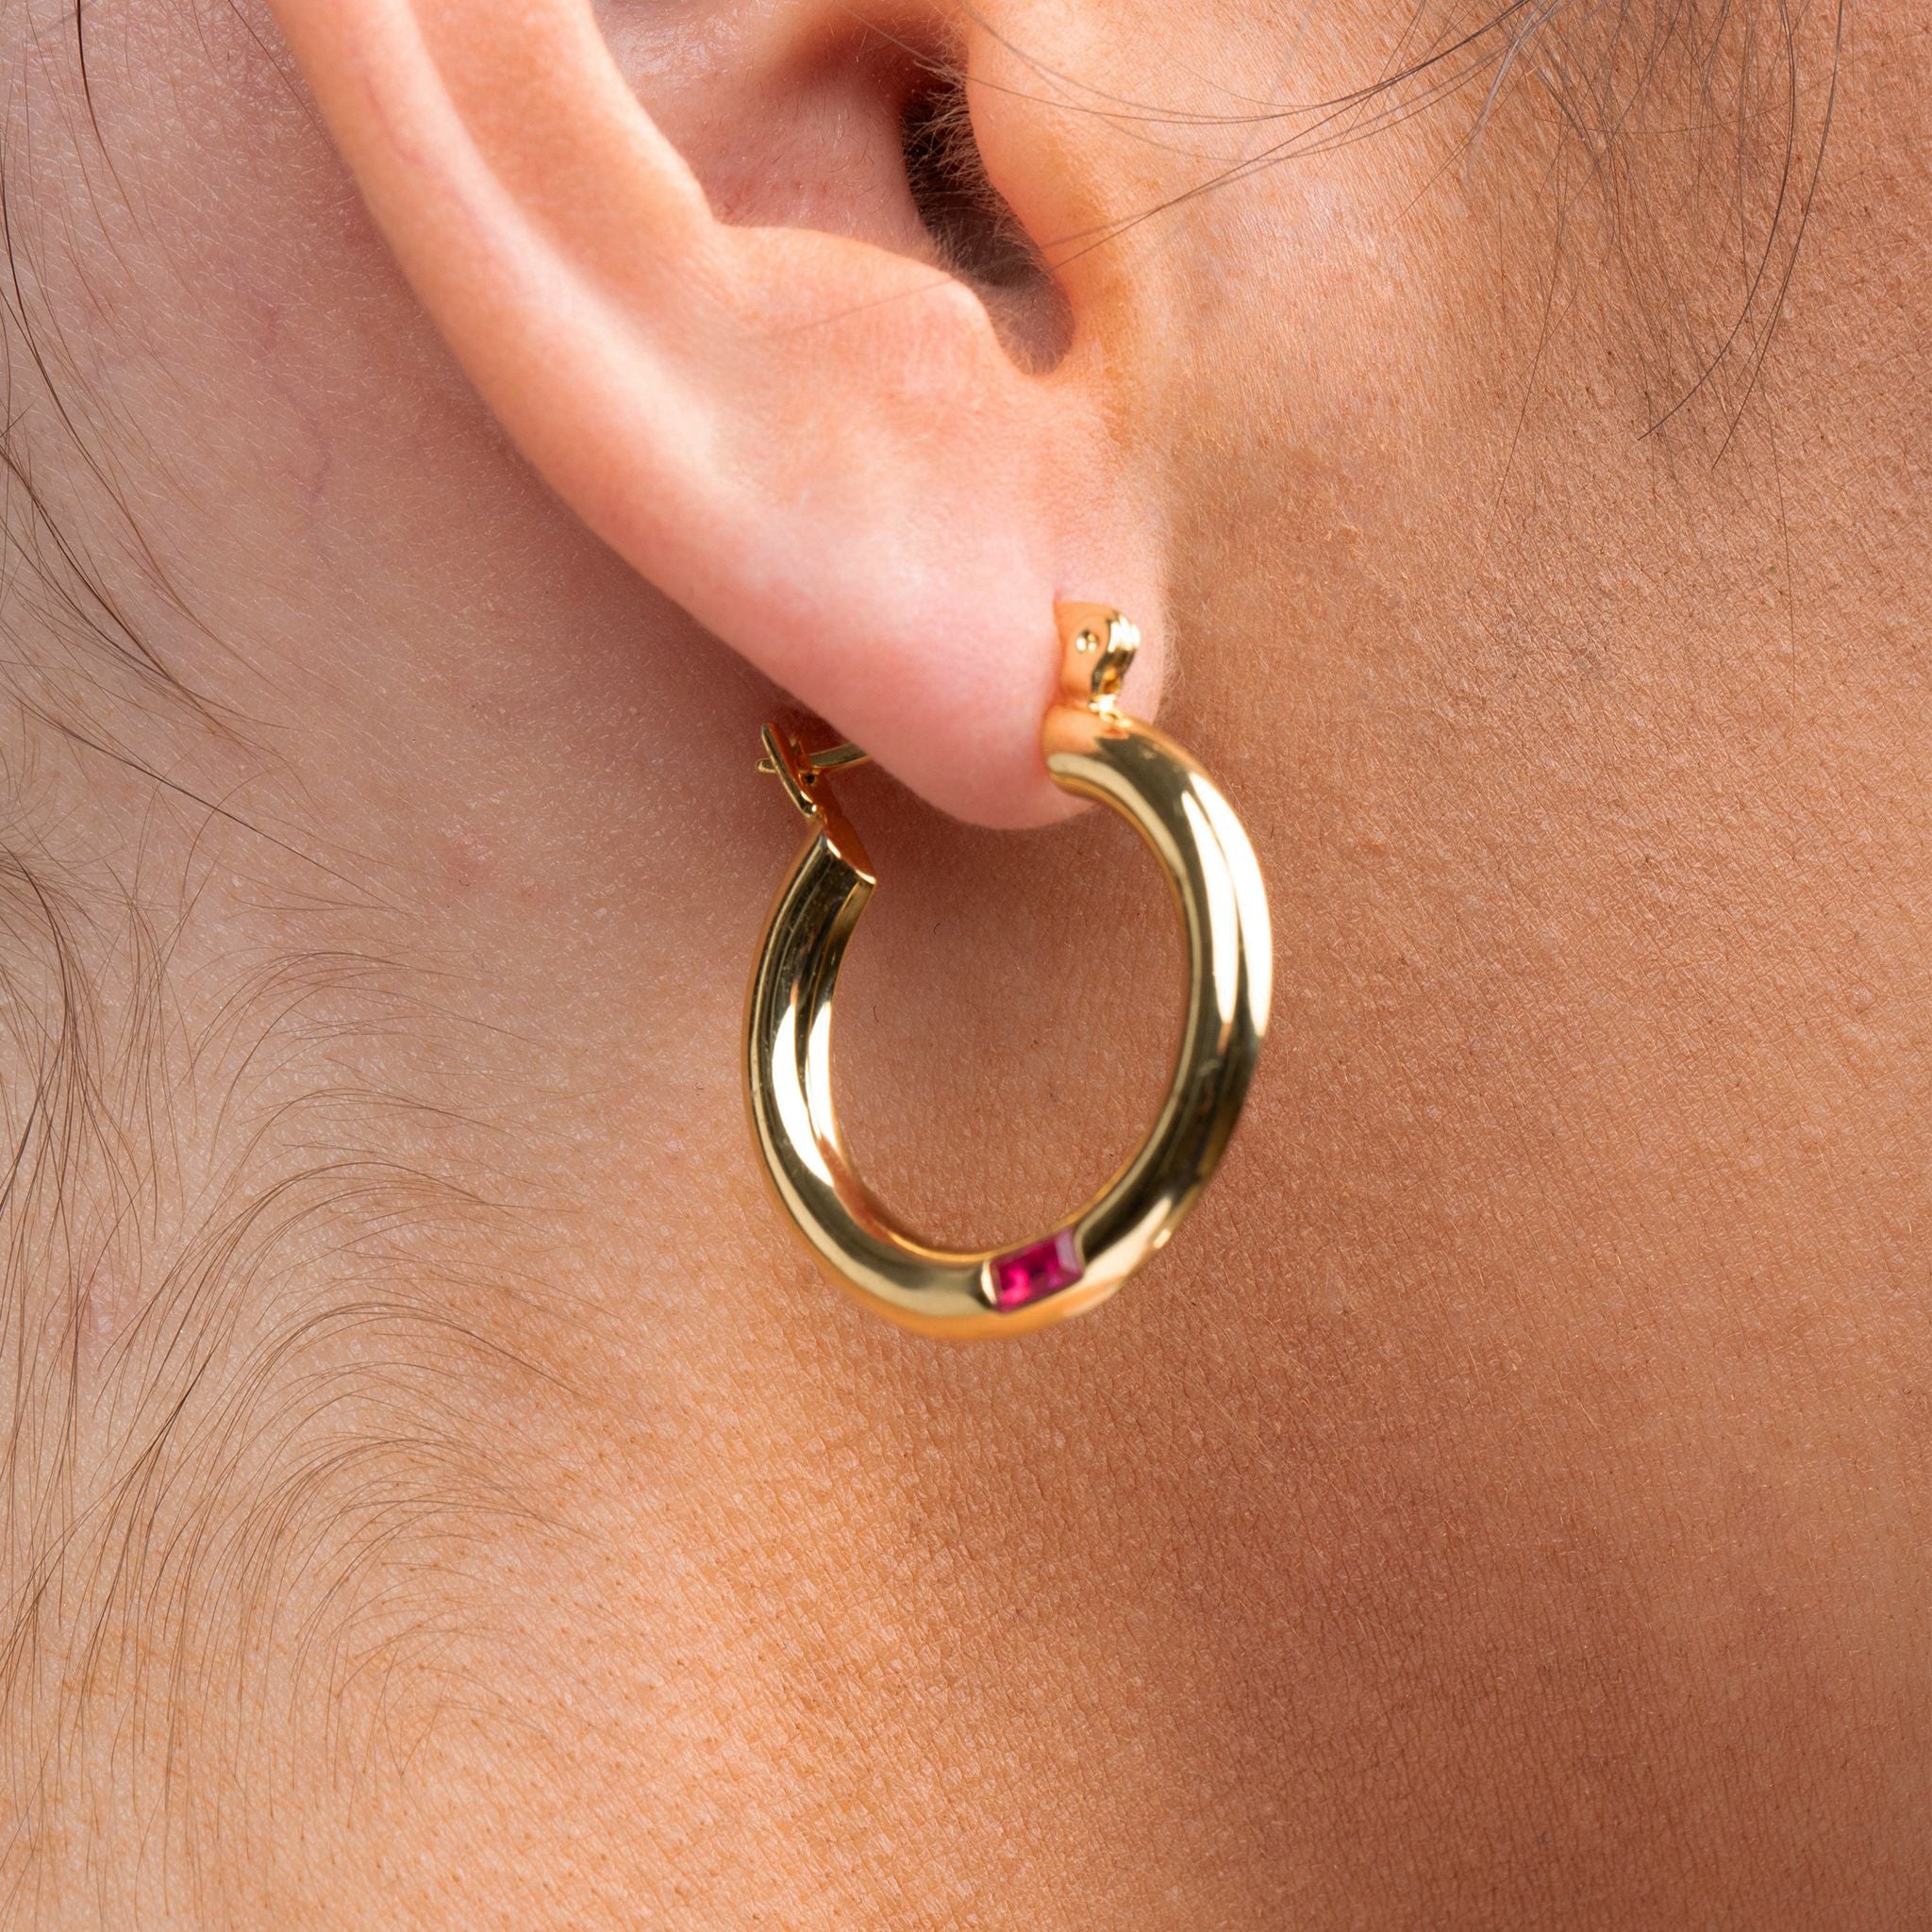 Hot Pink Gold Hoop Earrings with Stone